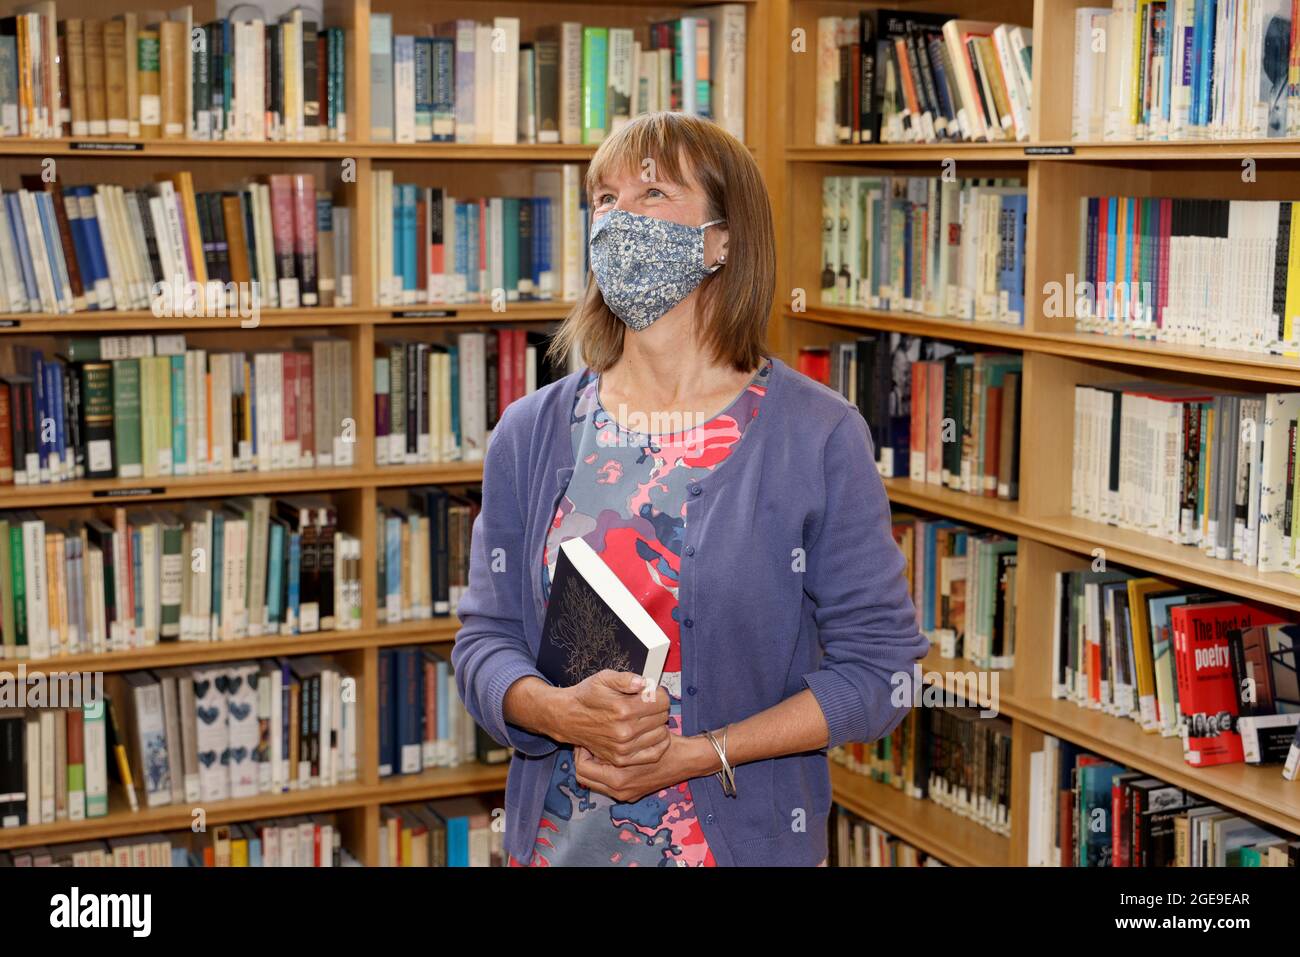 Kathleen Jamie after she was announced the new Makar (National Poet for Scotland) at the Scottish Poetry Library in Edinburgh. Picture date: Wednesday August 18, 2021. Stock Photo